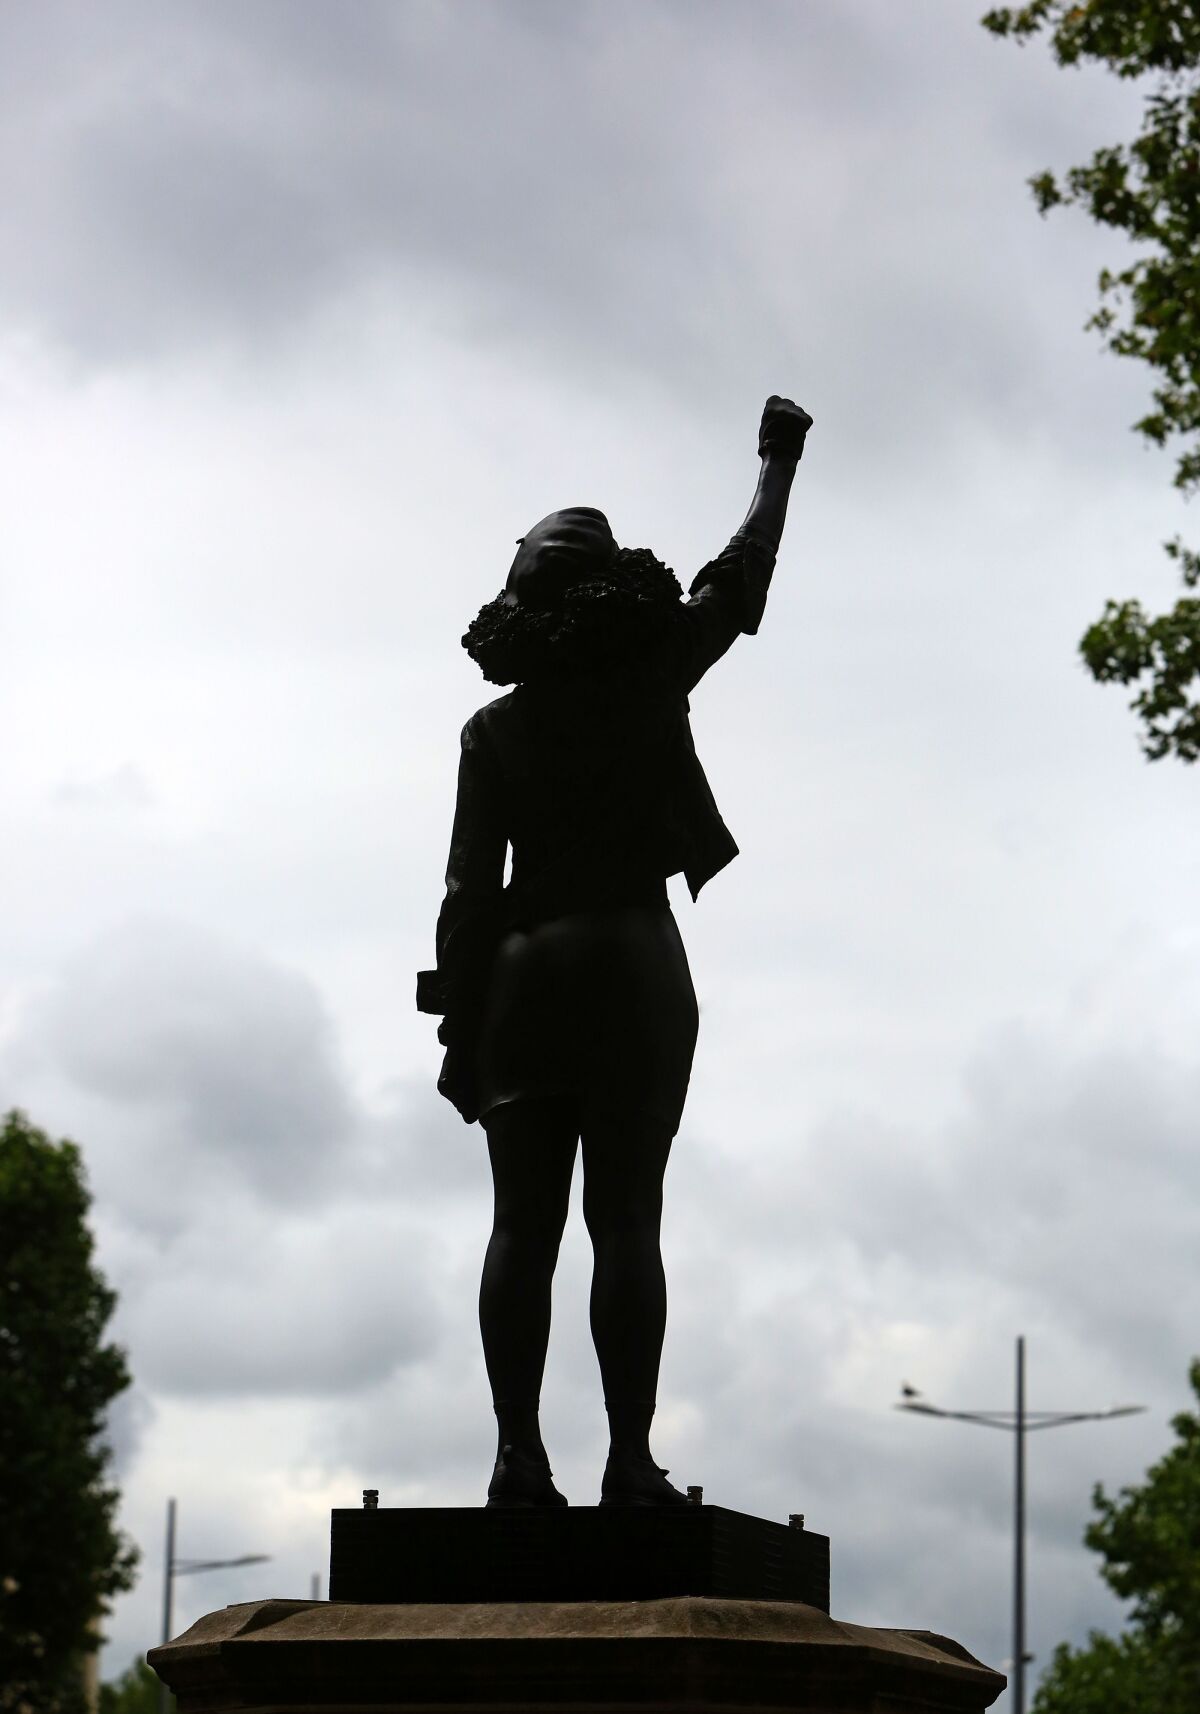  A statue of Jen Reid with an arm raised in a Black Power salute